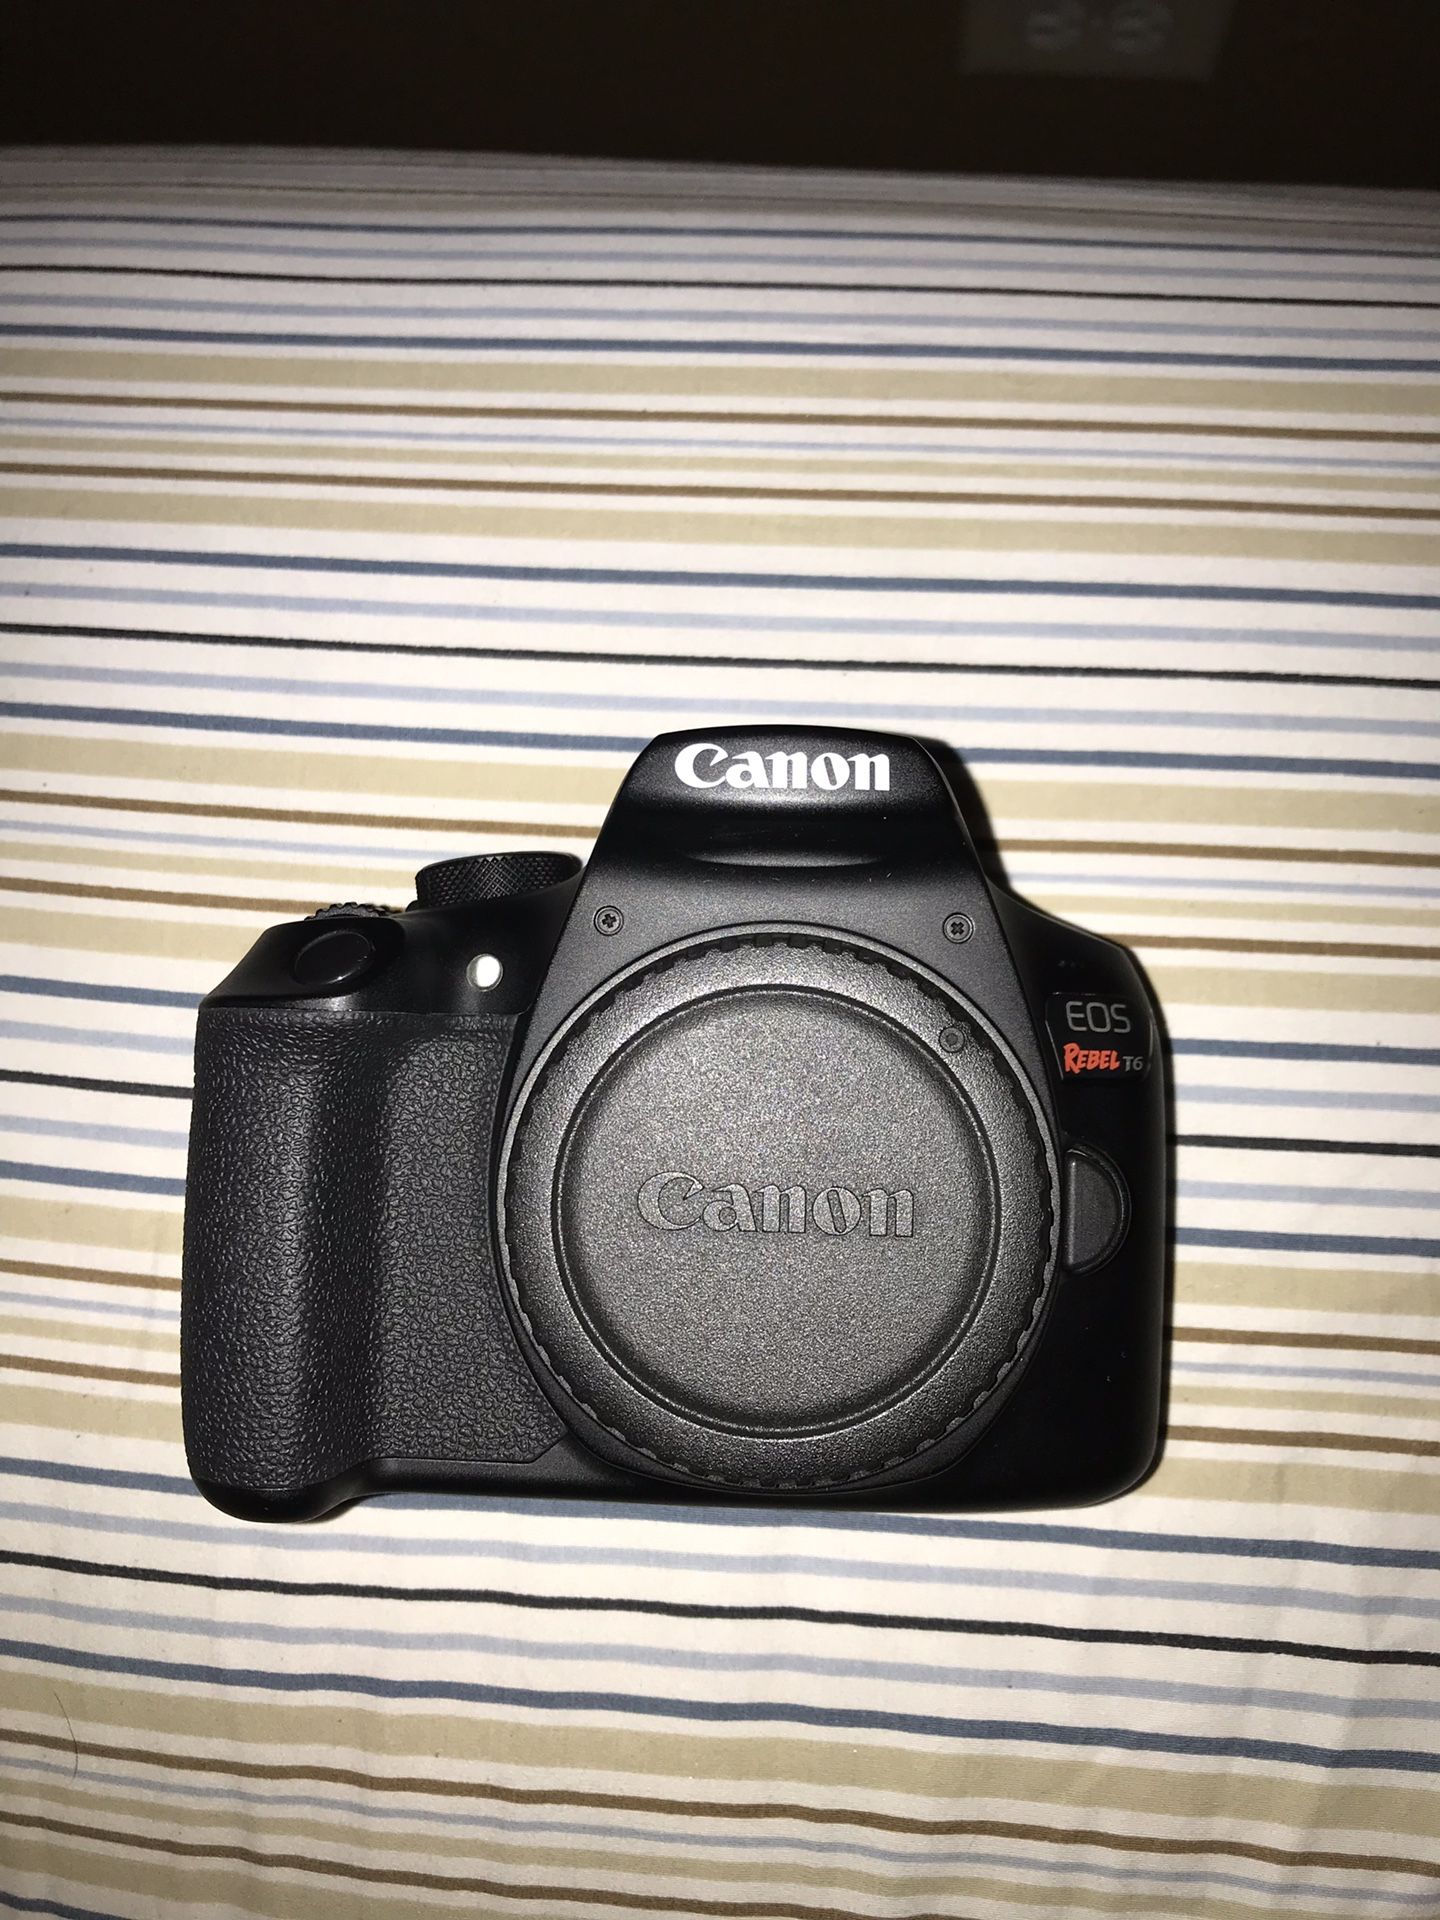 Canon EOS Rebel T6 (50 mm and 18-55mm lenses)